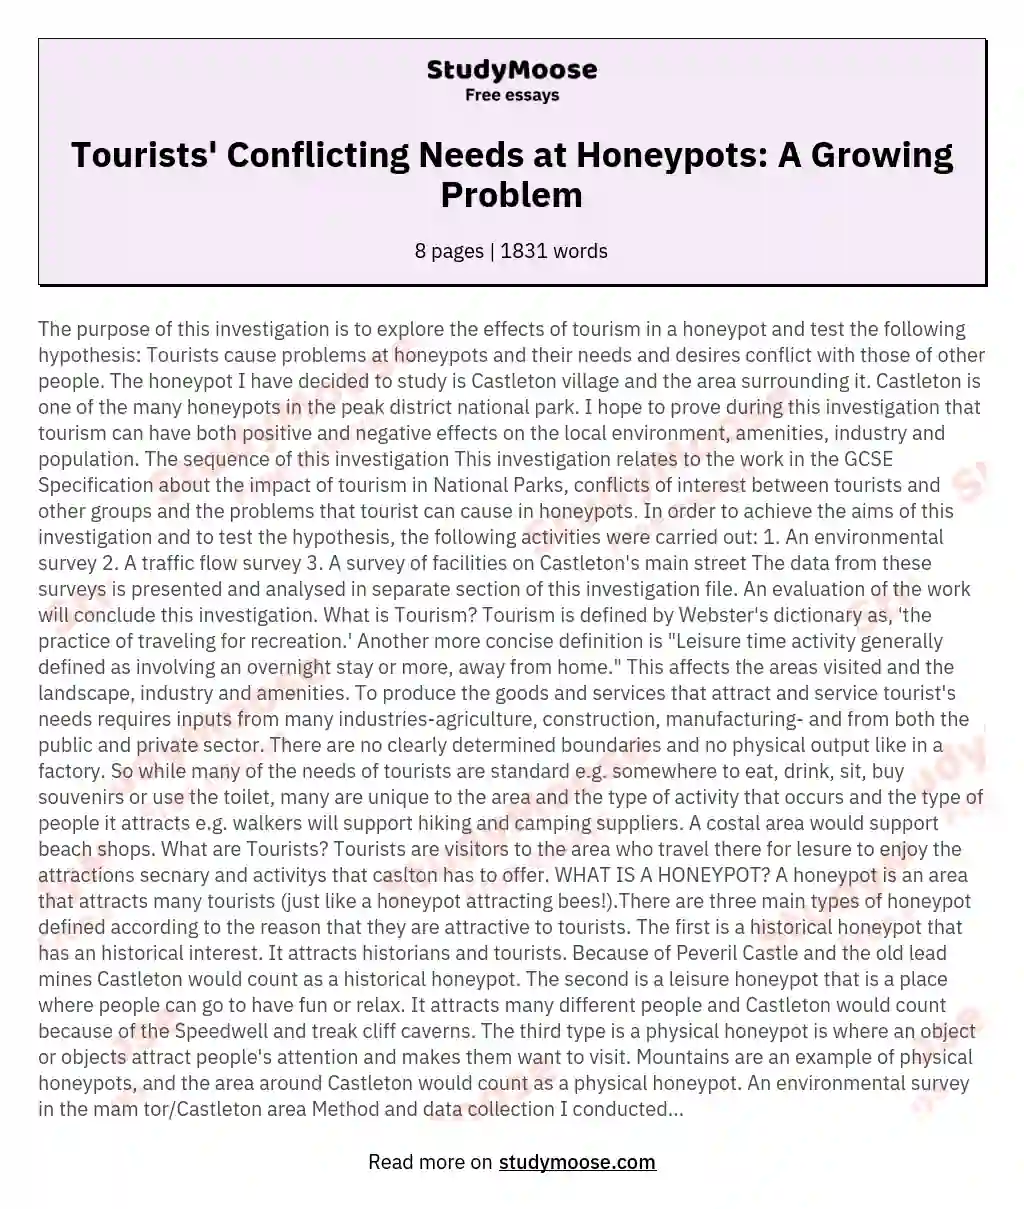 Tourists' Conflicting Needs at Honeypots: A Growing Problem essay